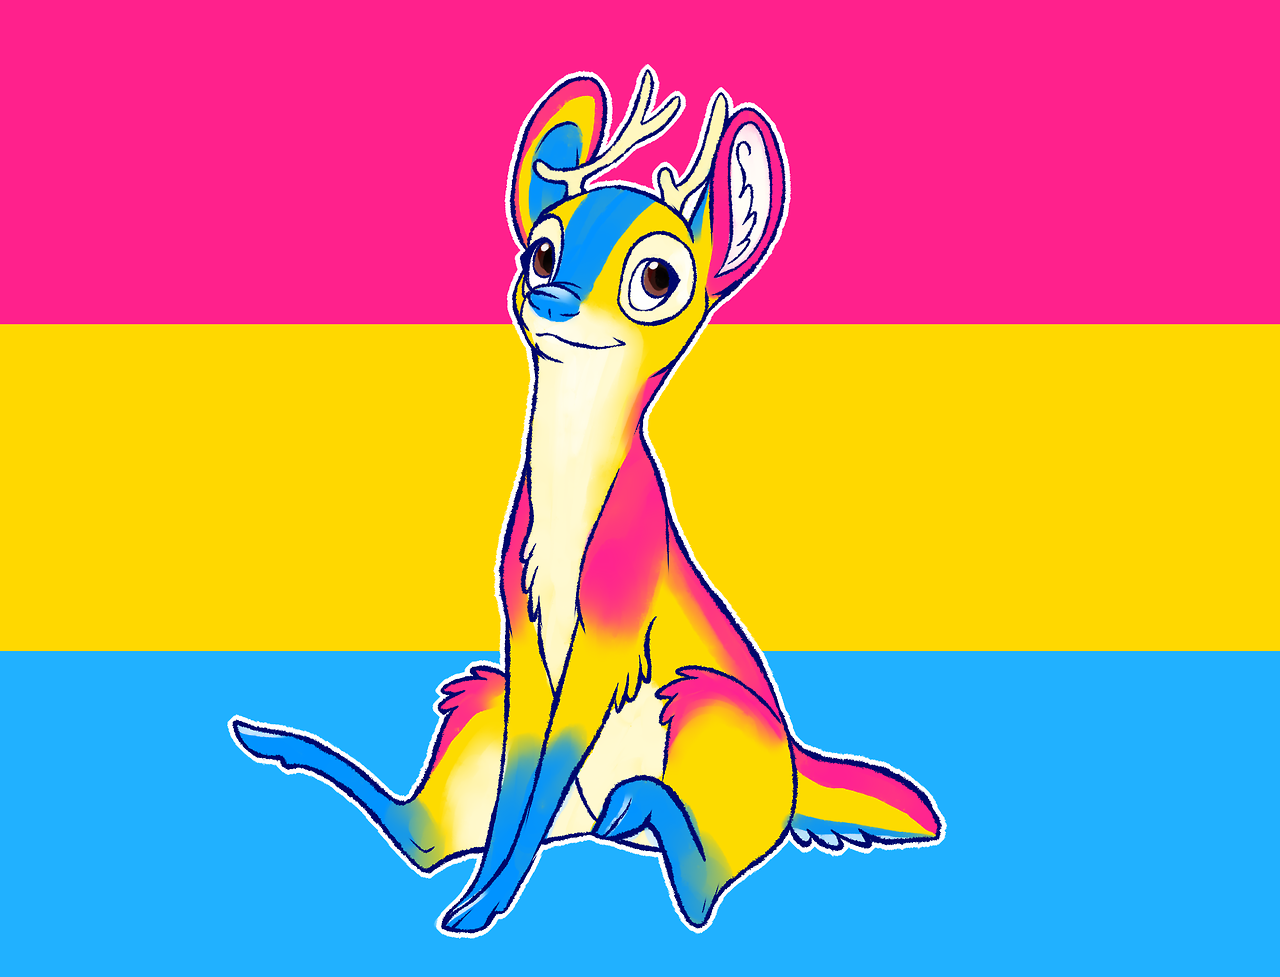 alouette-lulu:  I drew some flag deers for pride month ! Be proud of who you are